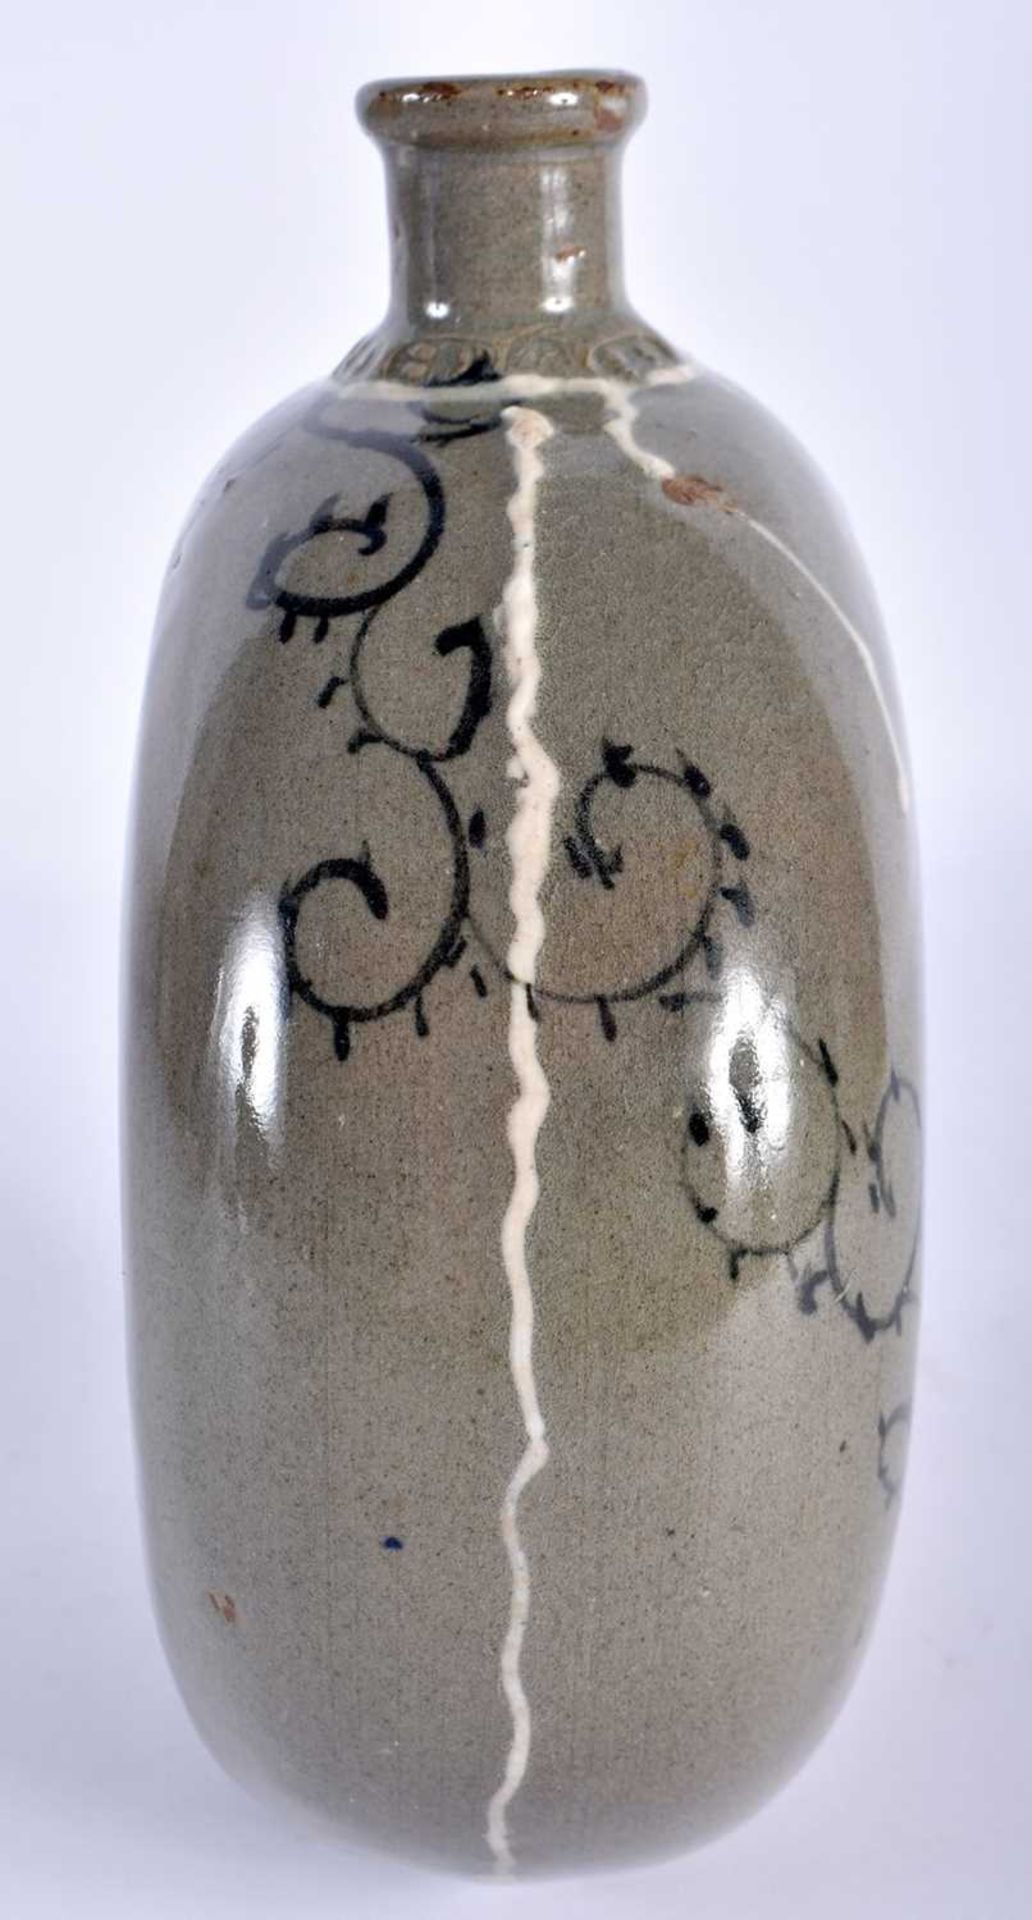 A RARE 19TH CENTURY KOREAN CELADON DOUGHNUT FORM VASE painted with sparse black and white - Image 2 of 6